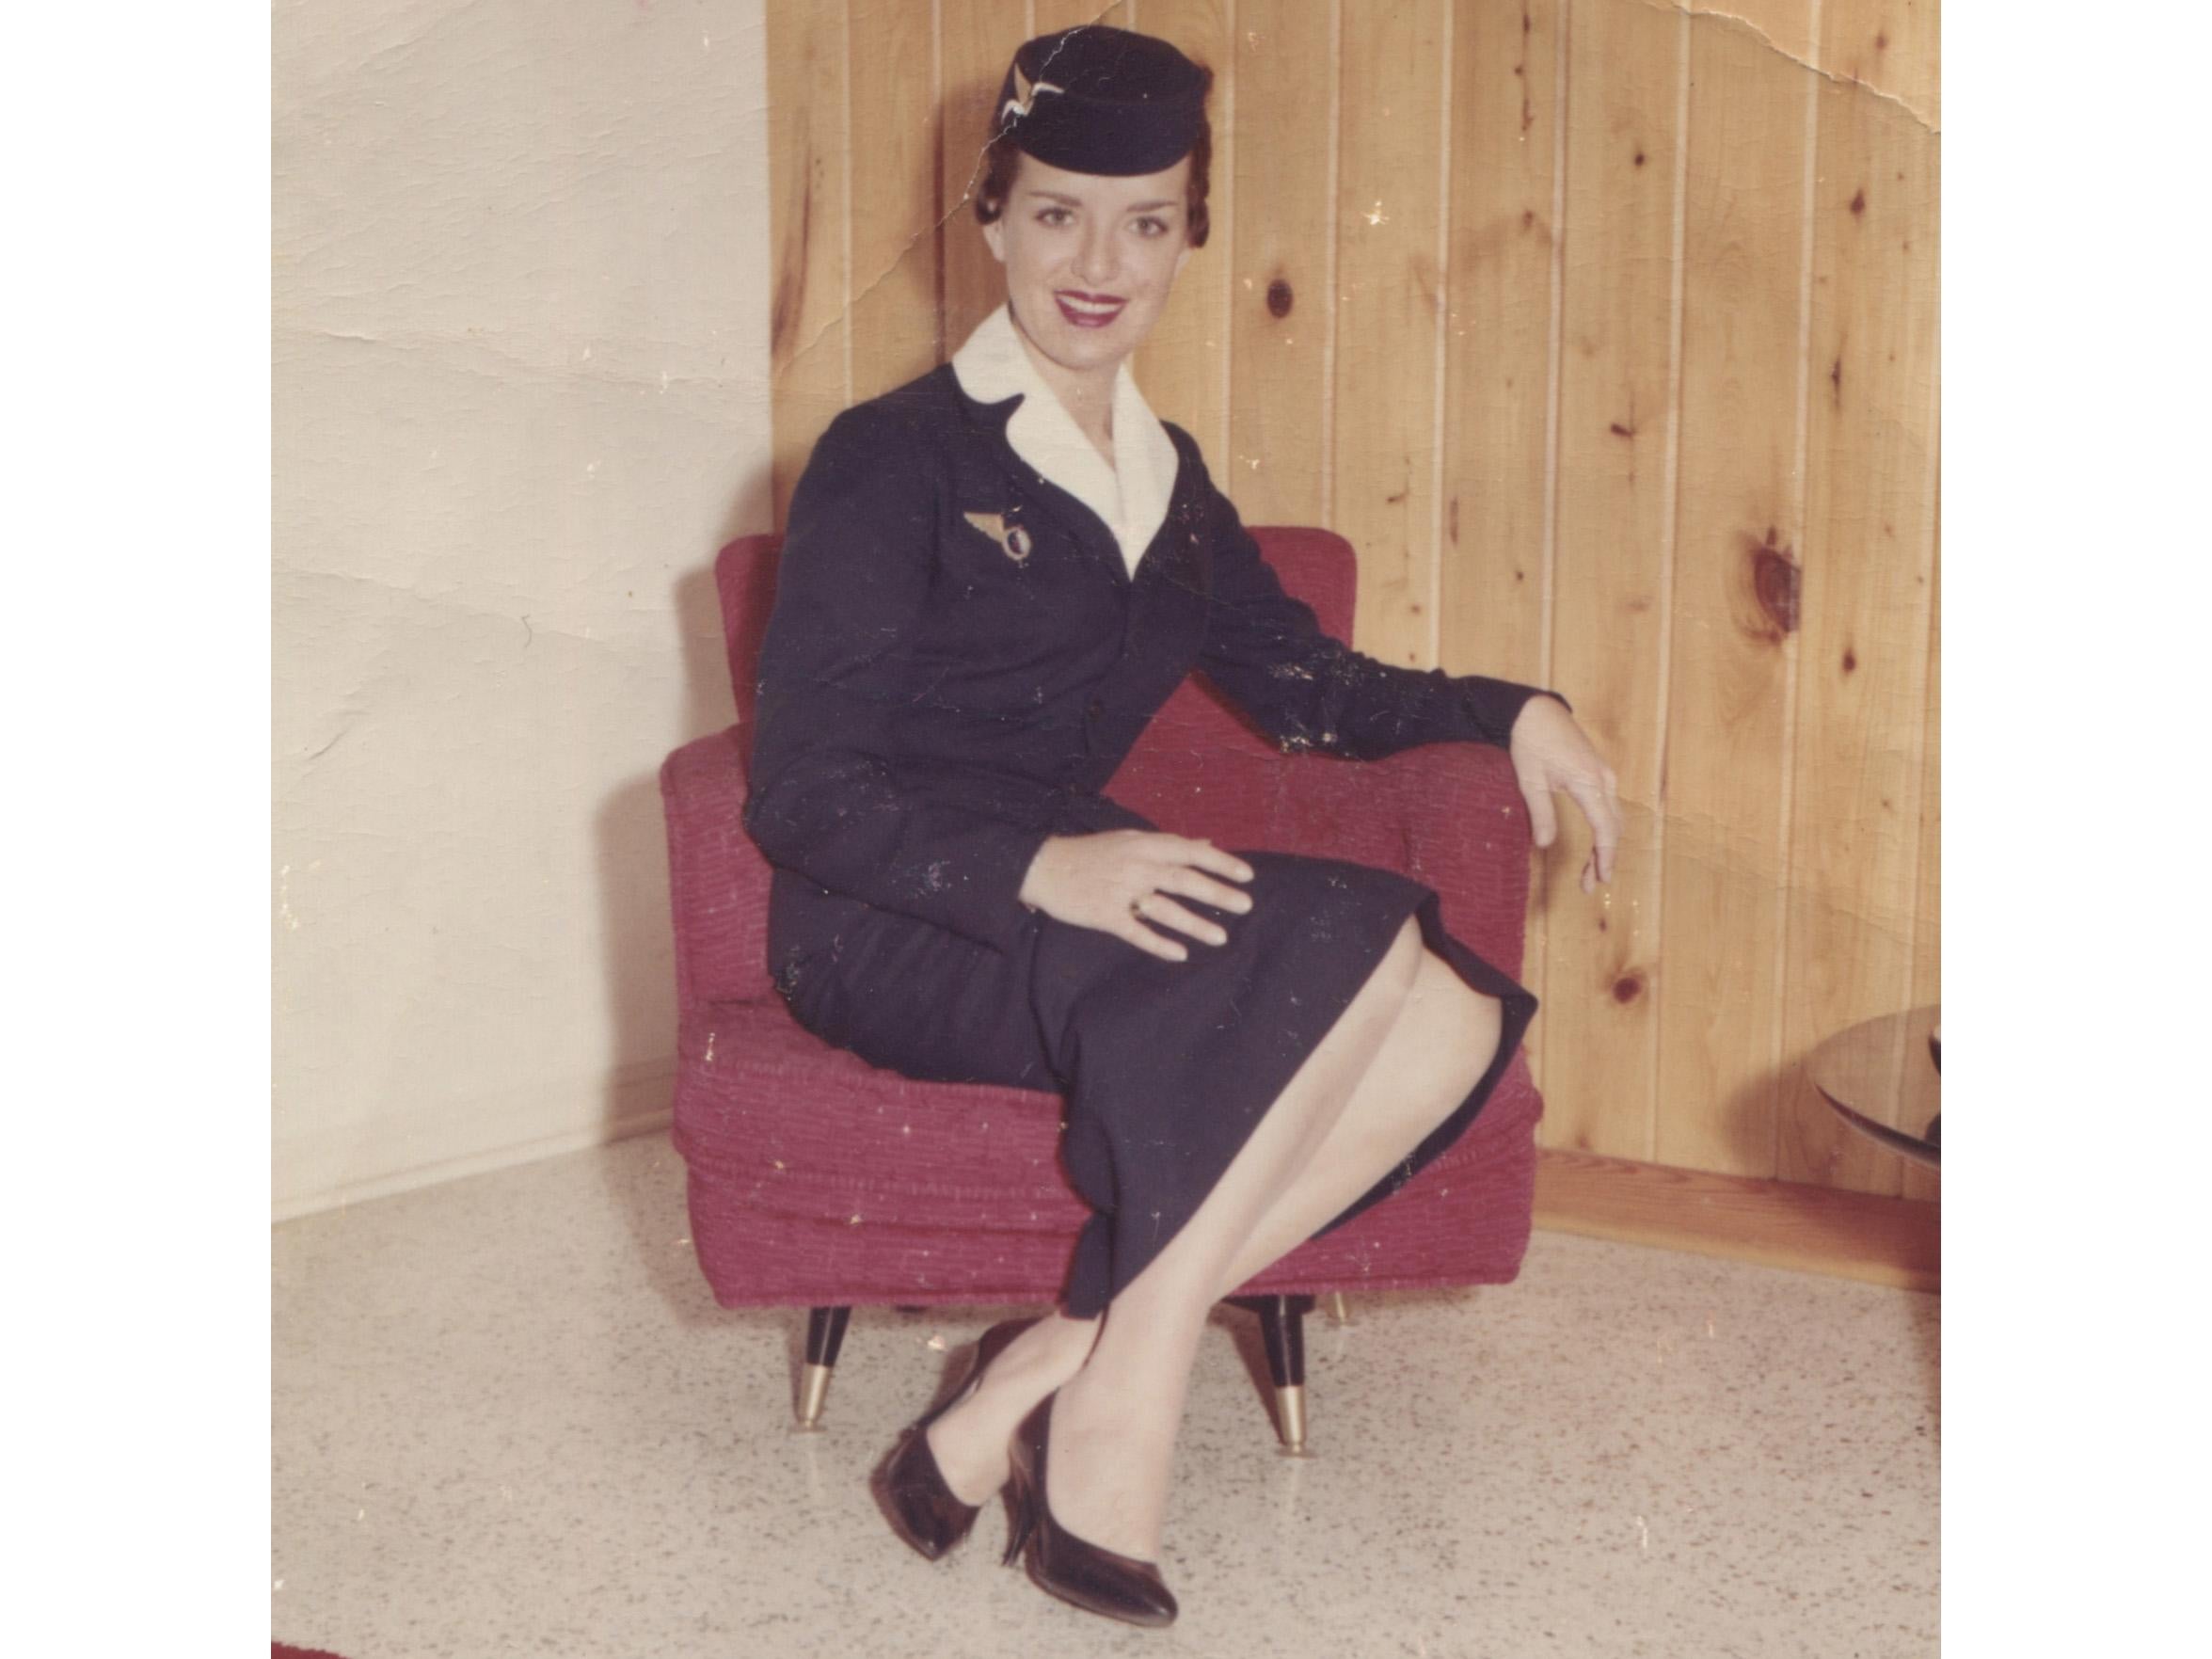 Bette Nash began her career as a flight attendant in 1957 when her Eastern Air Lines uniform included a pillbox hat